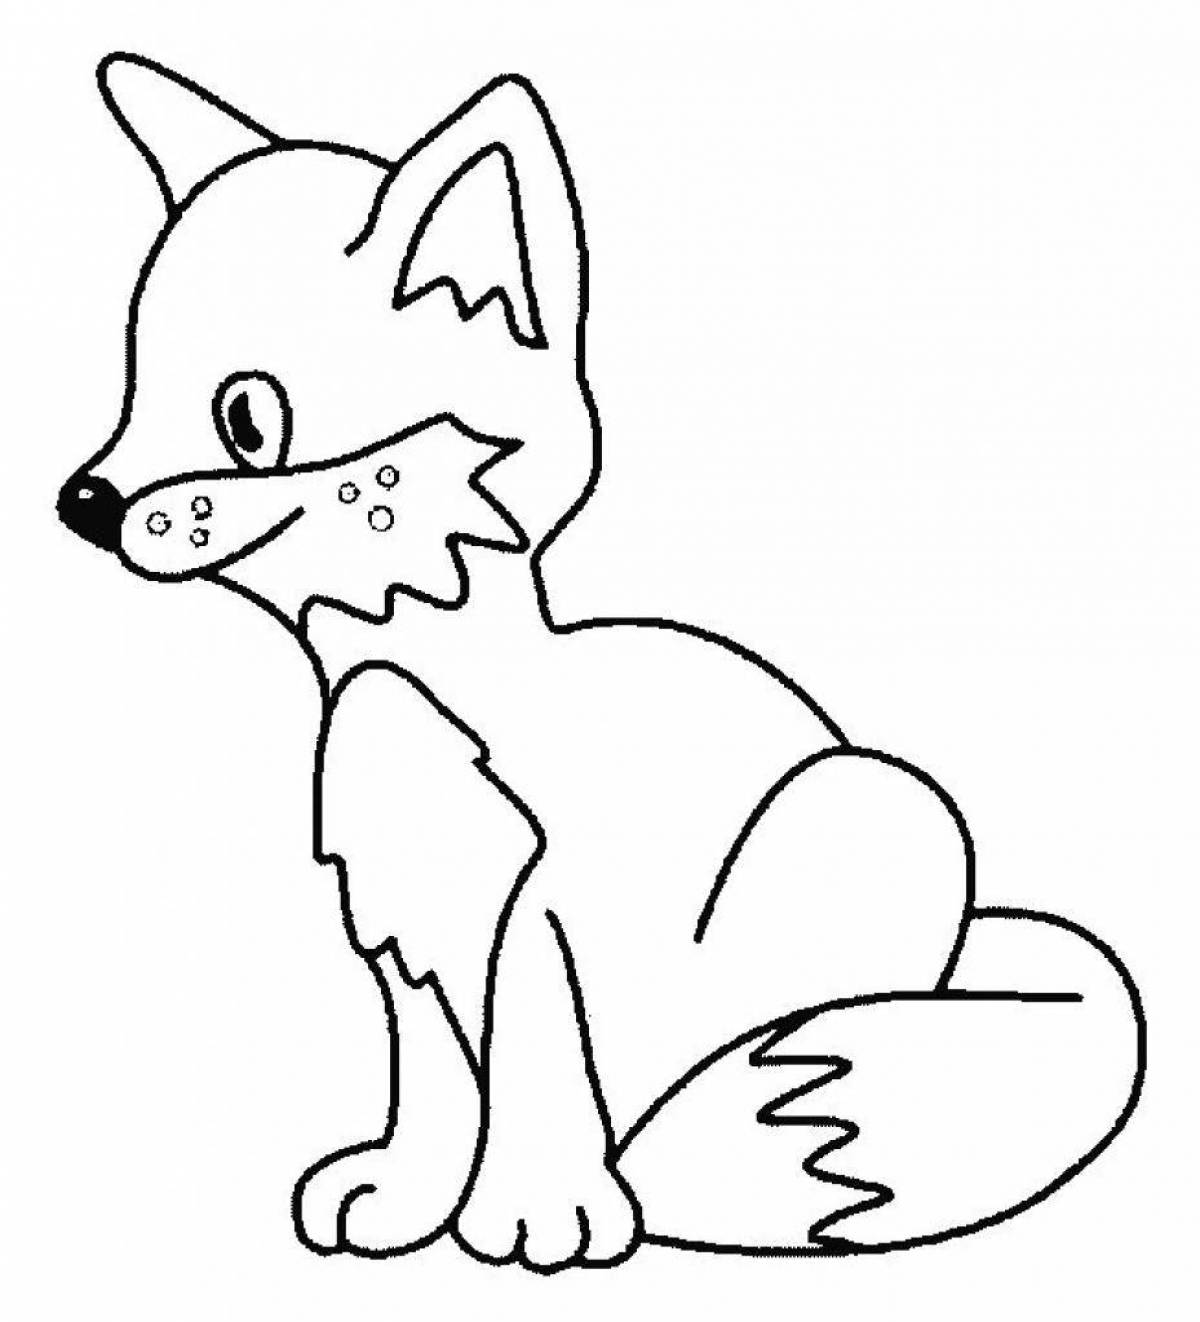 Colourful fox coloring book for kids